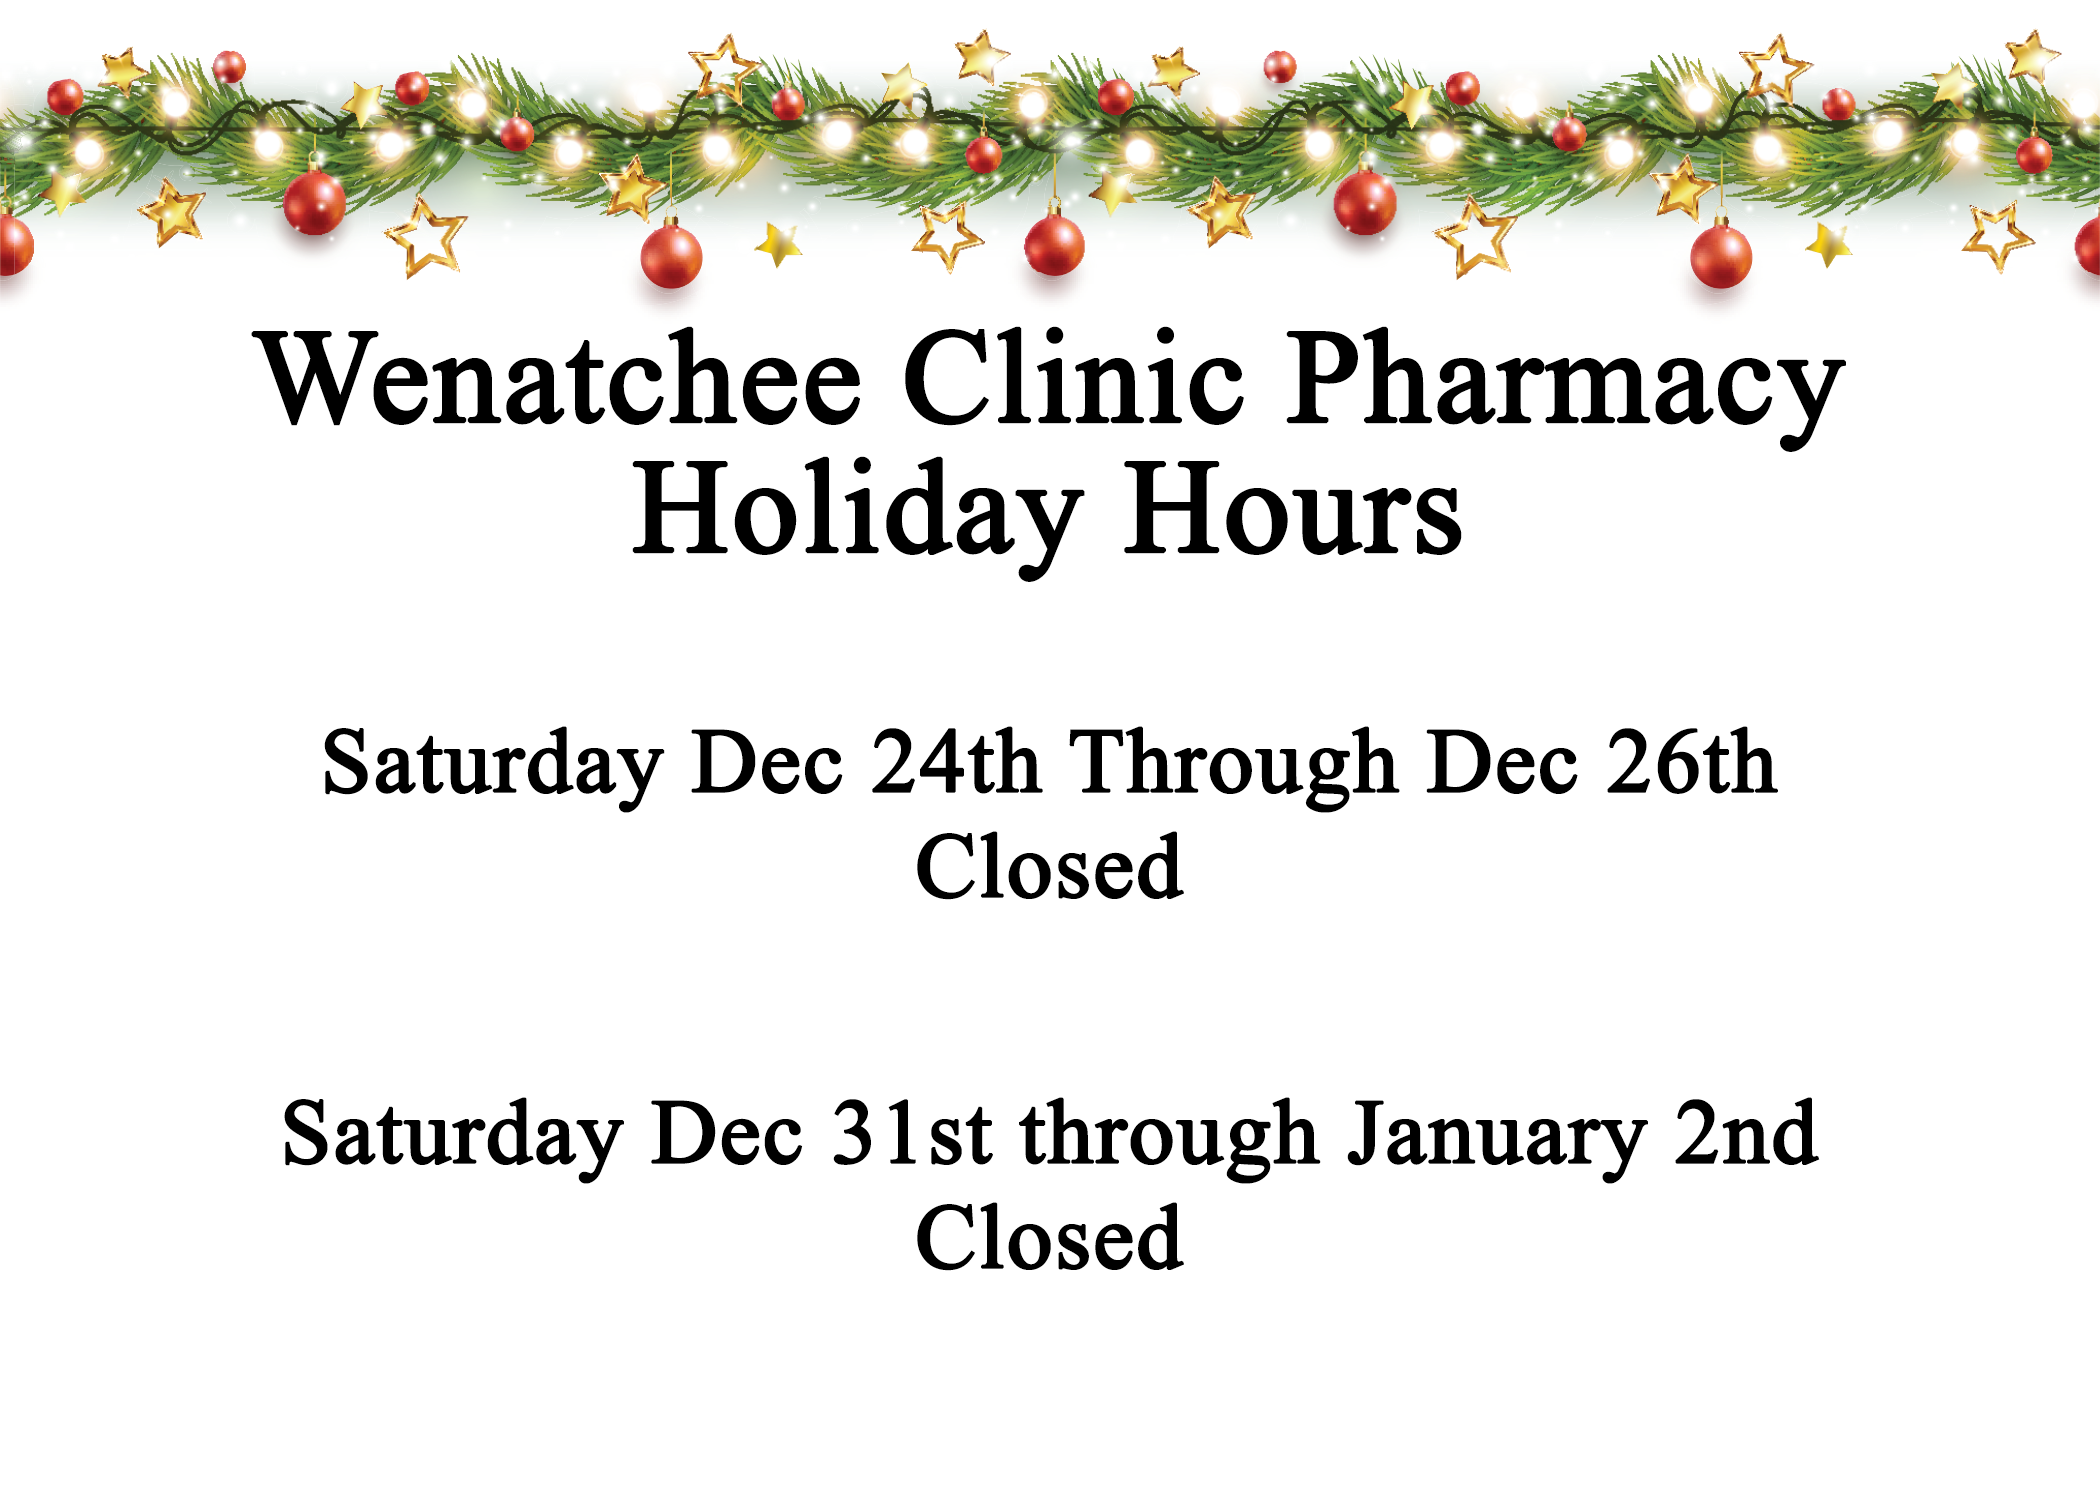 Closed December 24th through December 26th and December 31st through January 2nd.